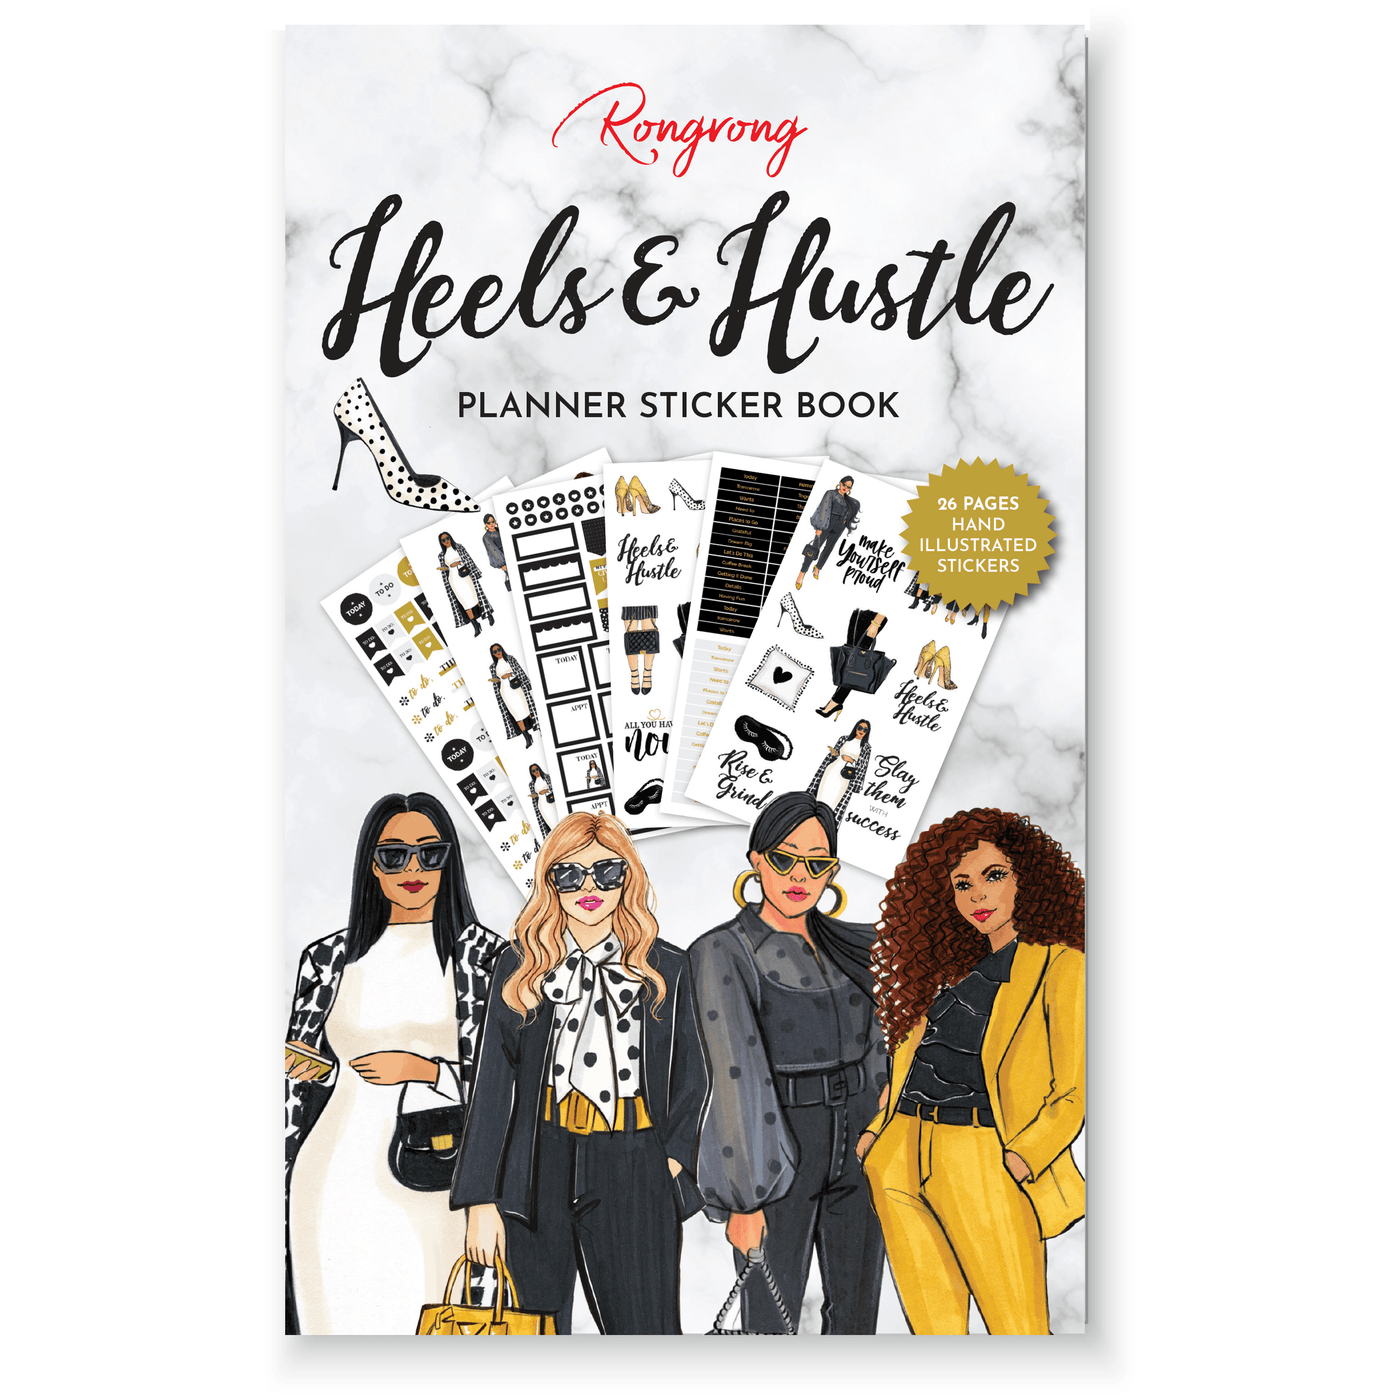 HEELS AND HUSTLE FUNCTIONAL STICKER BOOK by Rongrong DeVoe